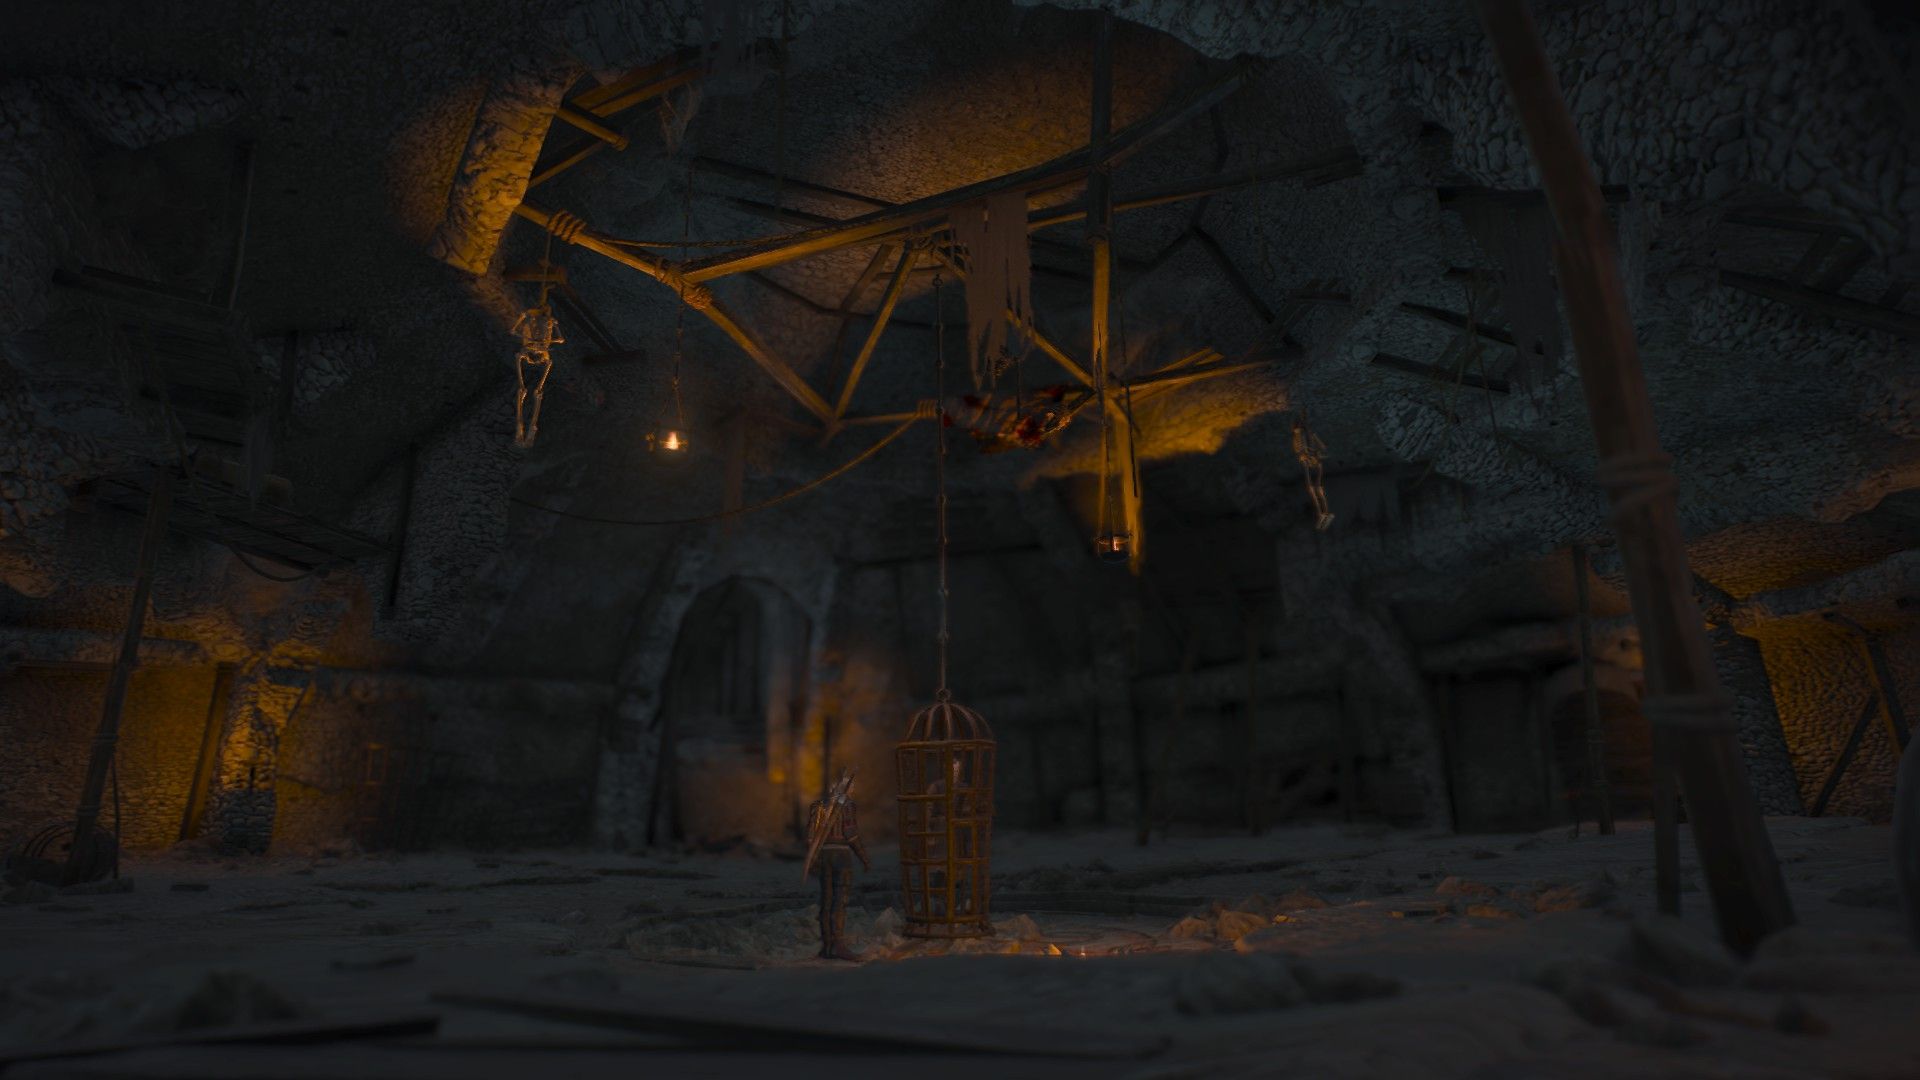 Geralt locked his friend in a cavernous cage under the castle.